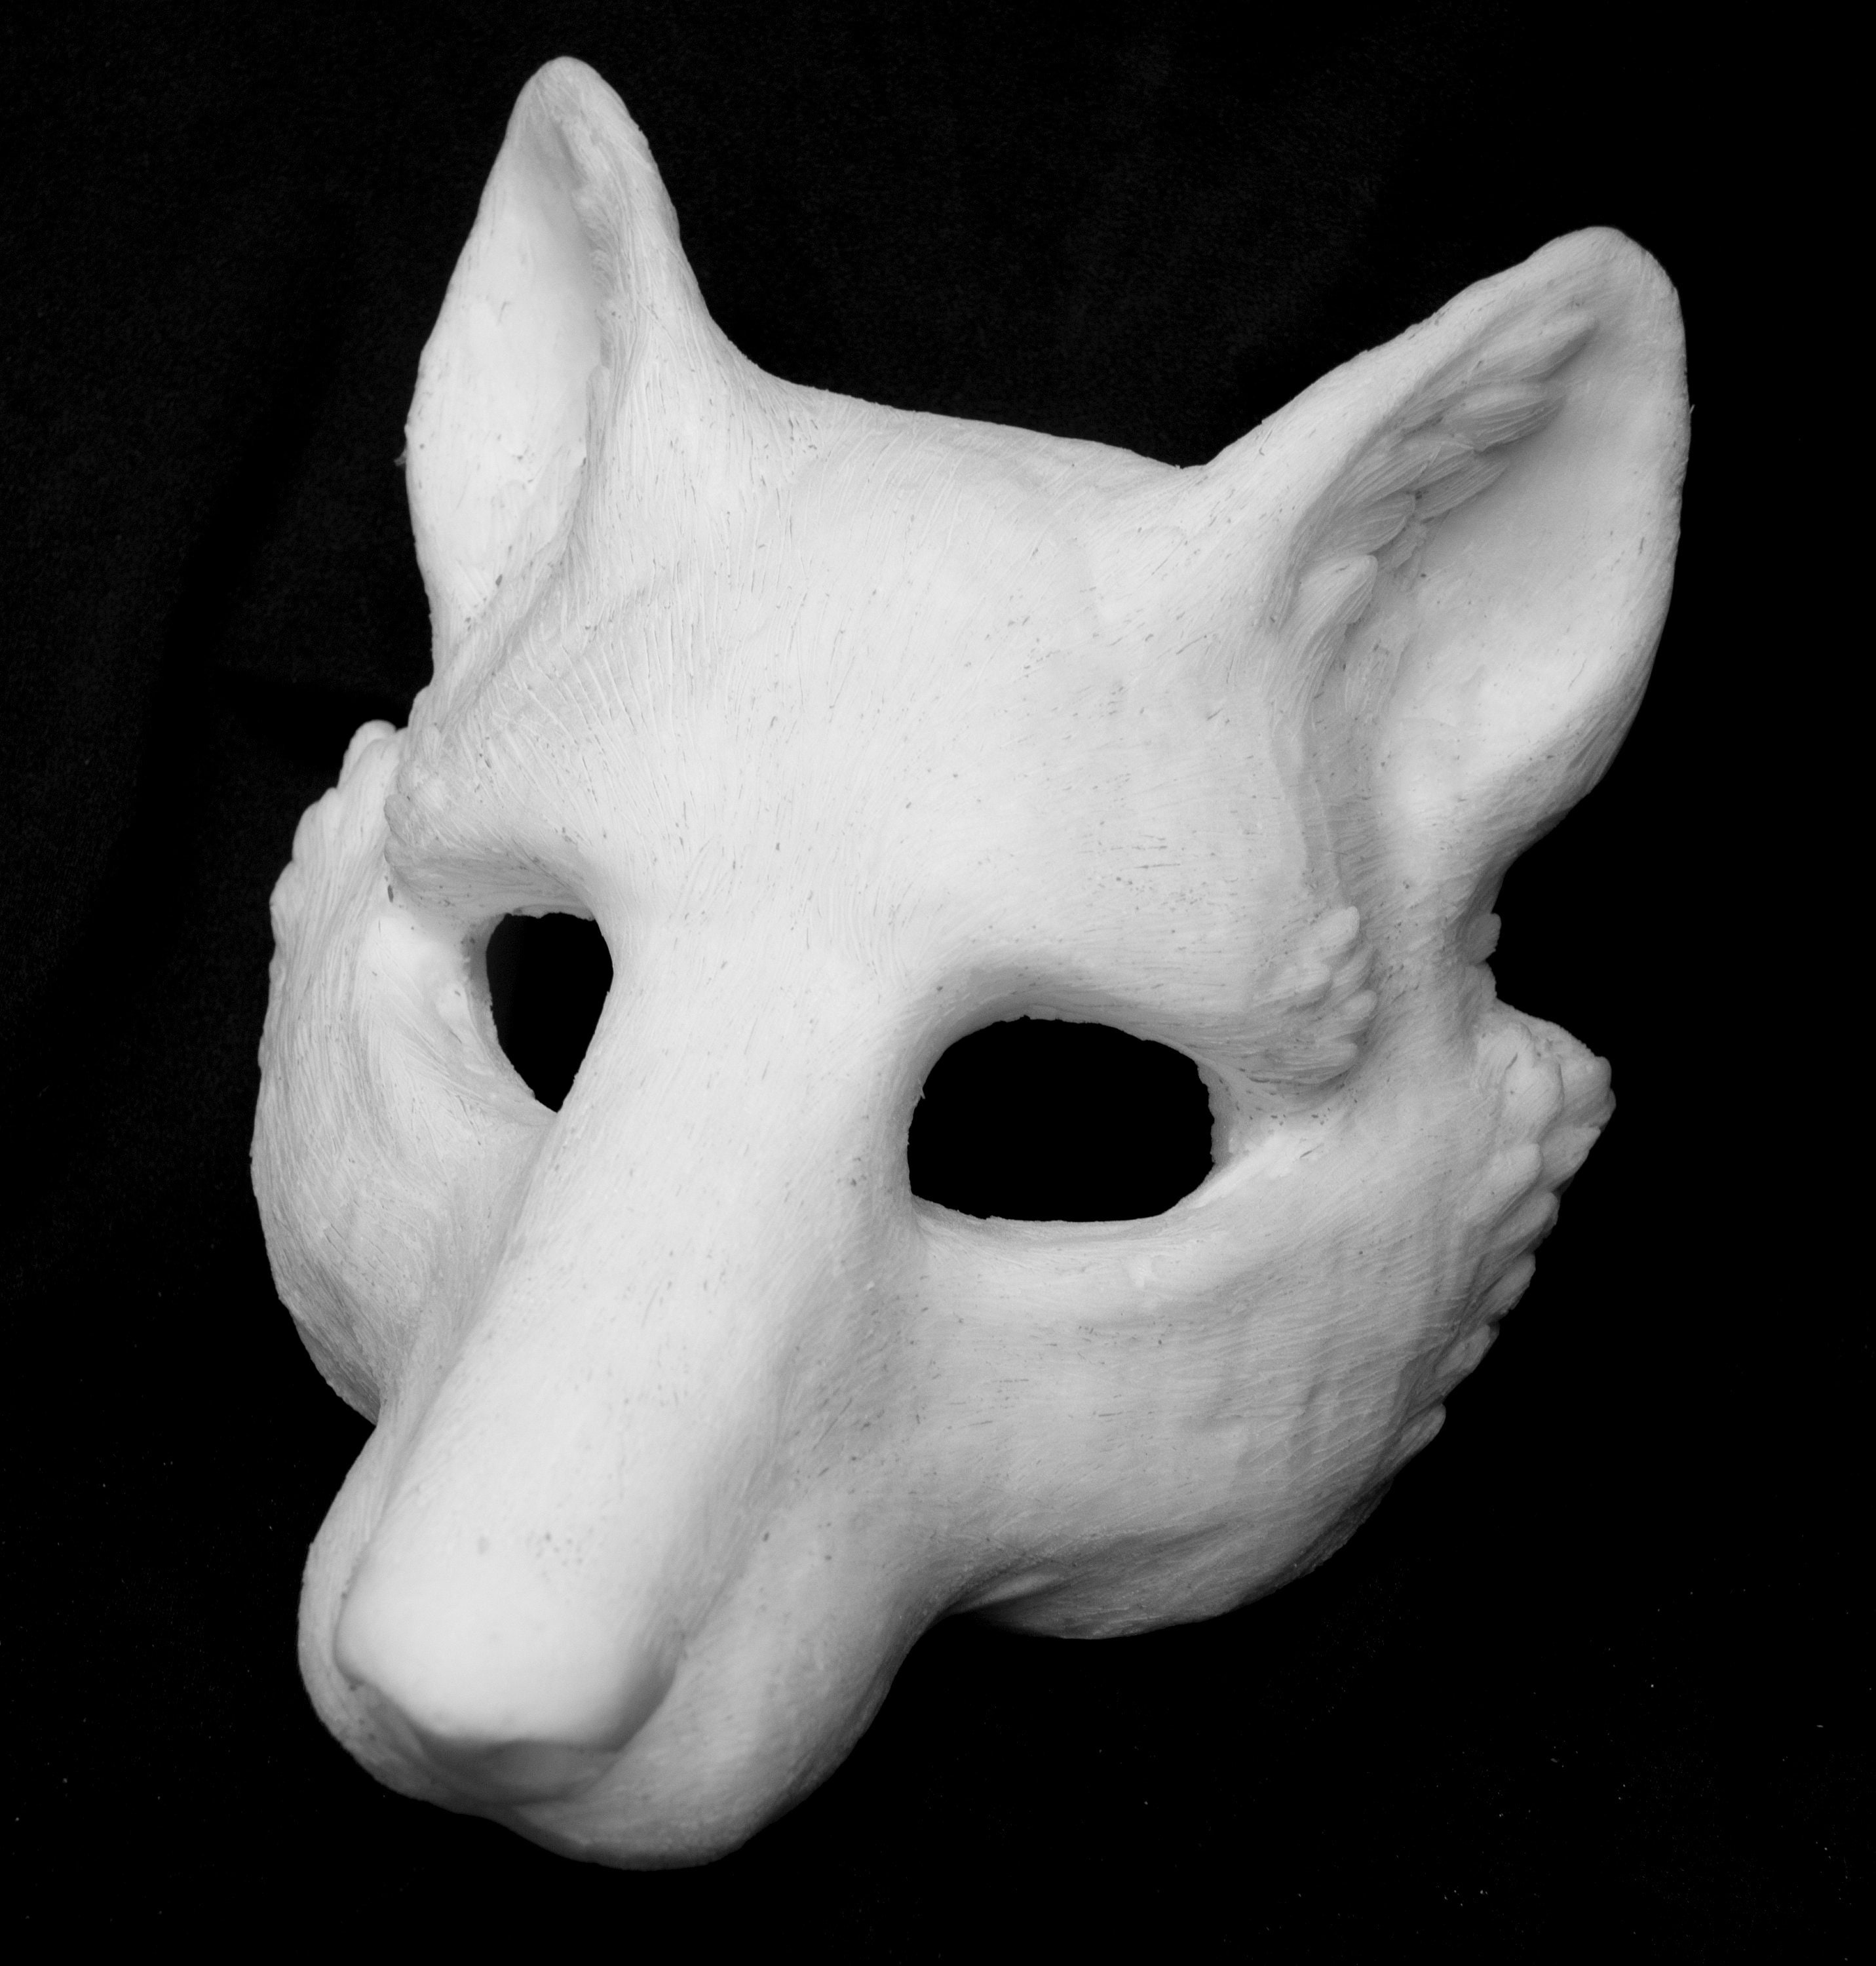 Therian Mask Fox Japanese Disguise Funny Carnaval Cosplay Festival